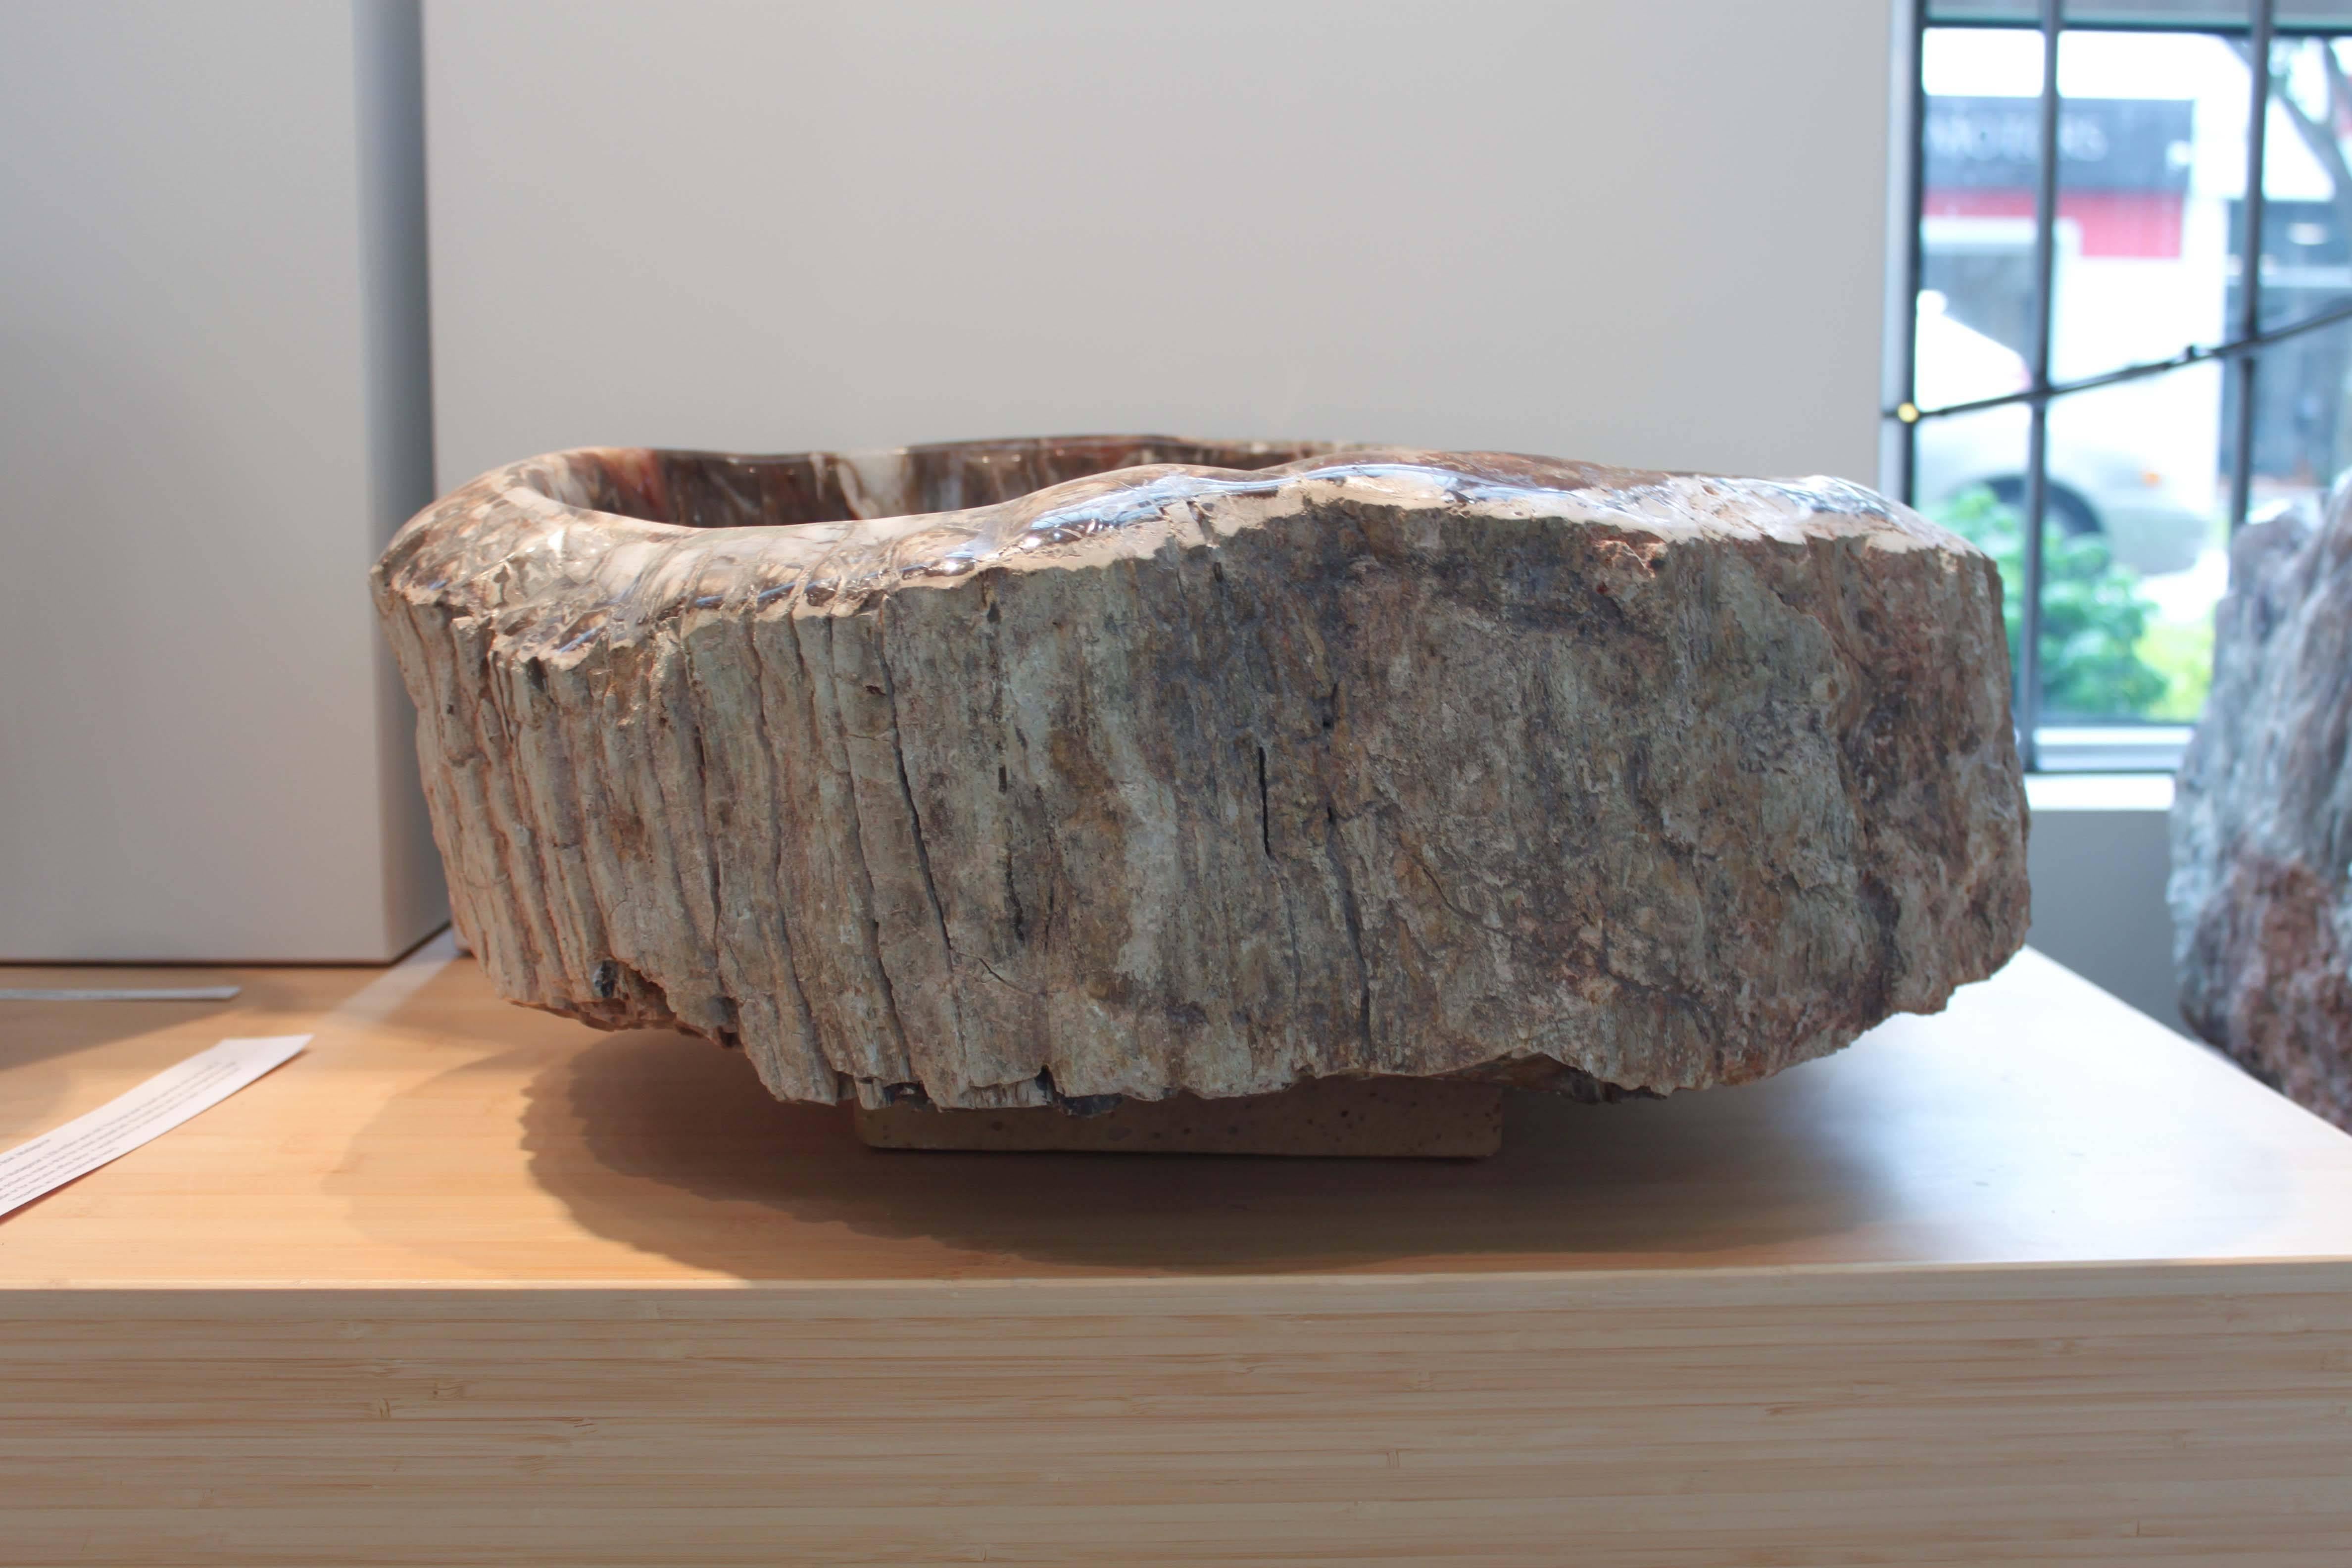 This petrified wood bowl formed in Madagascar is over 250 million years old and still has its bark. Beautiful variation in color, polished interior could be drilled to make the most unusual sink.